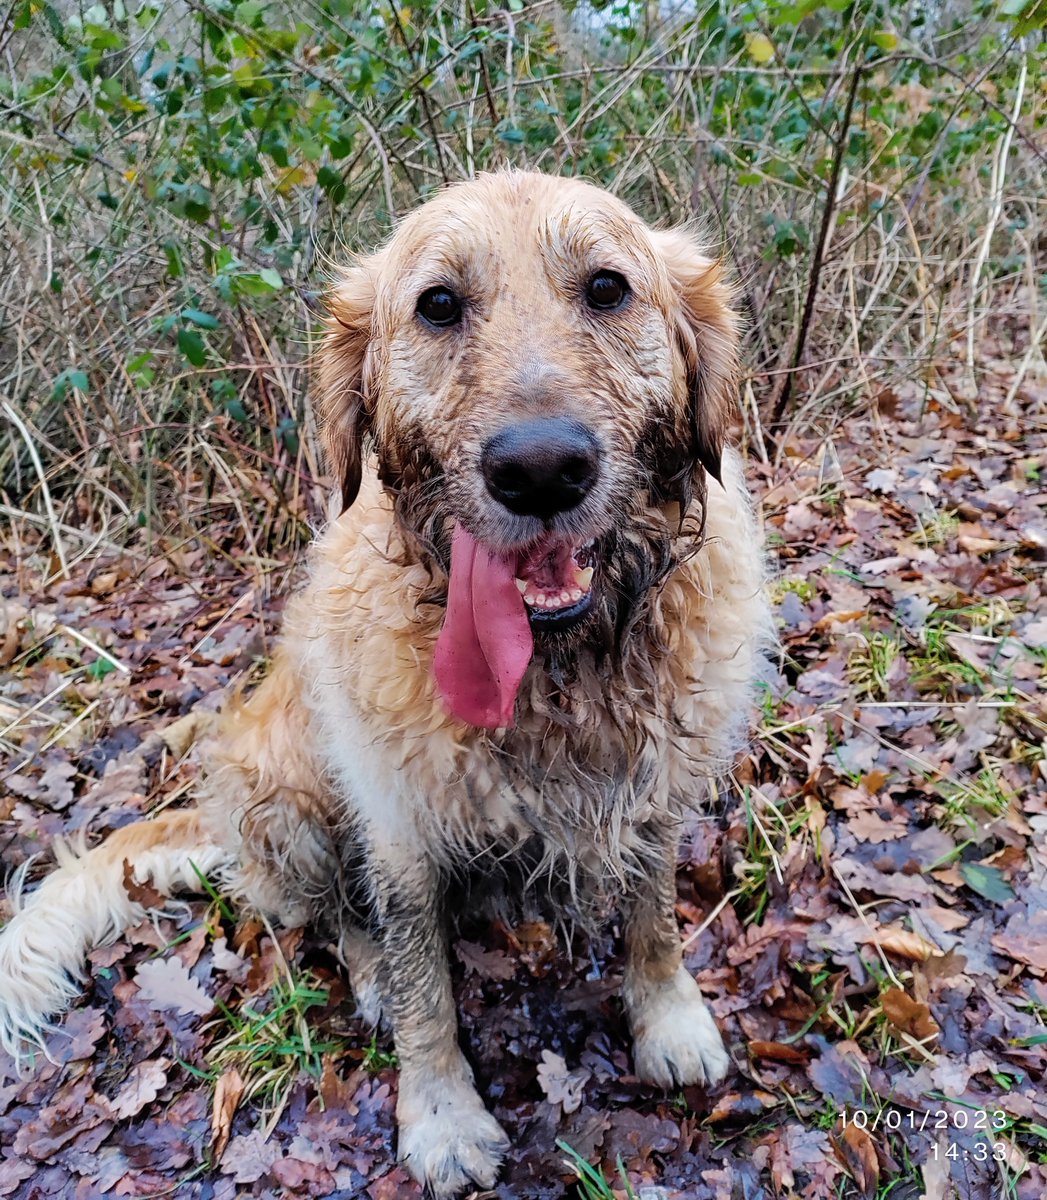 Good morning and welcome to Wednesdays edition of 'Dog in a Bog' brought to you by..ME!!! 🥳🥳😂 #dogsoftwitter #mudclub #delighted #GoldenRetrievers #puddle #britishweather #rain